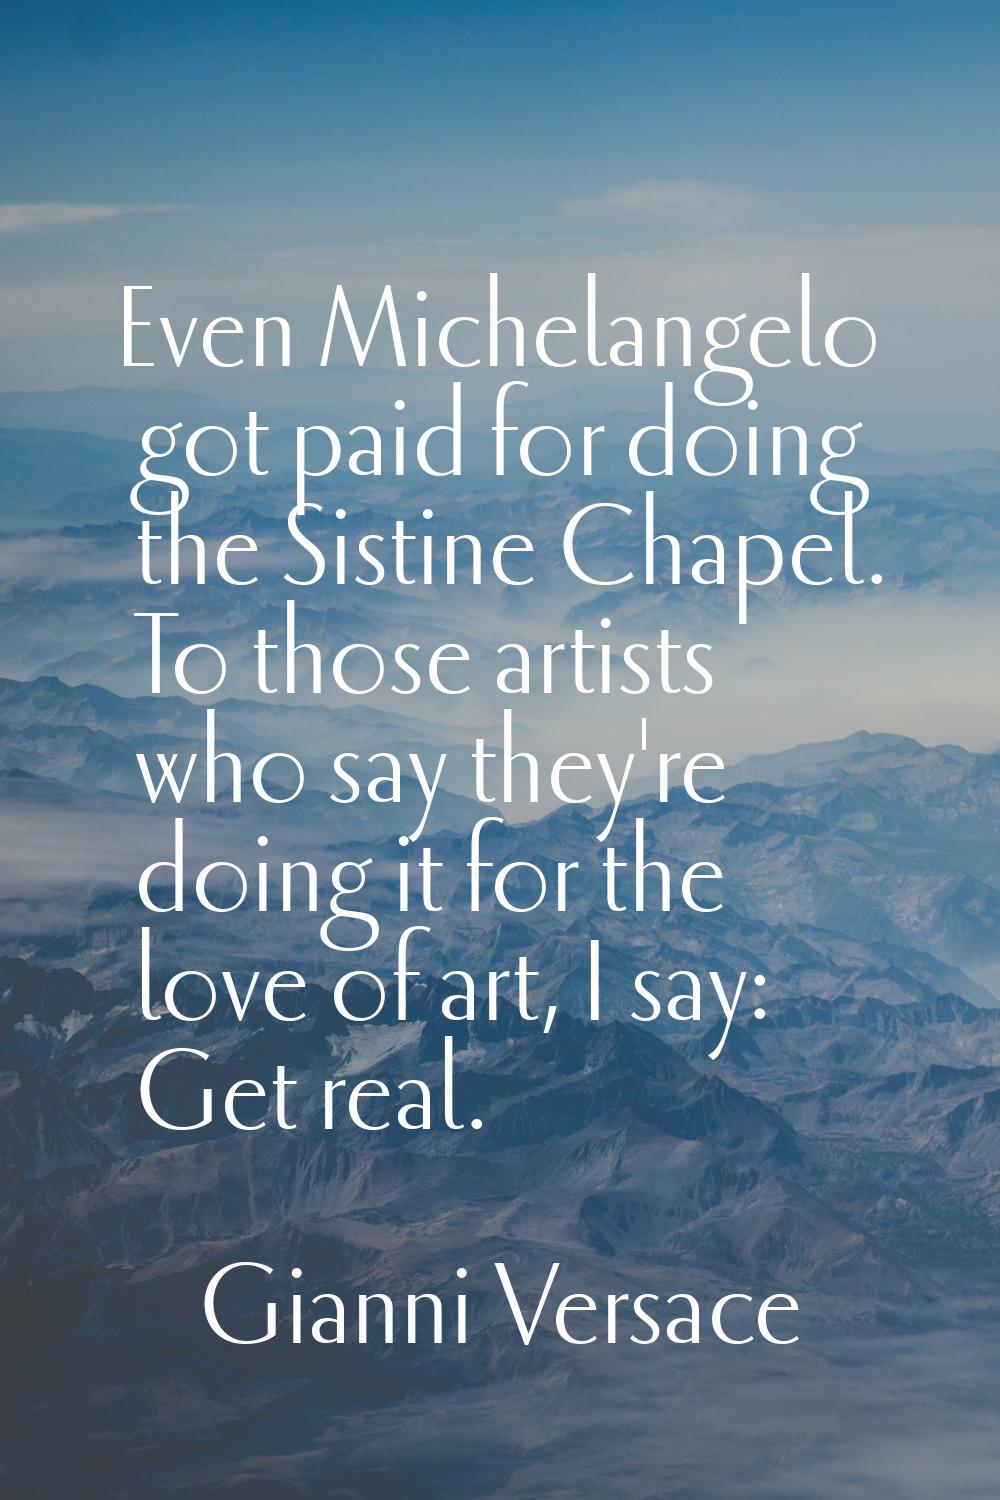 Even Michelangelo got paid for doing the Sistine Chapel. To those artists who say they're doing it 